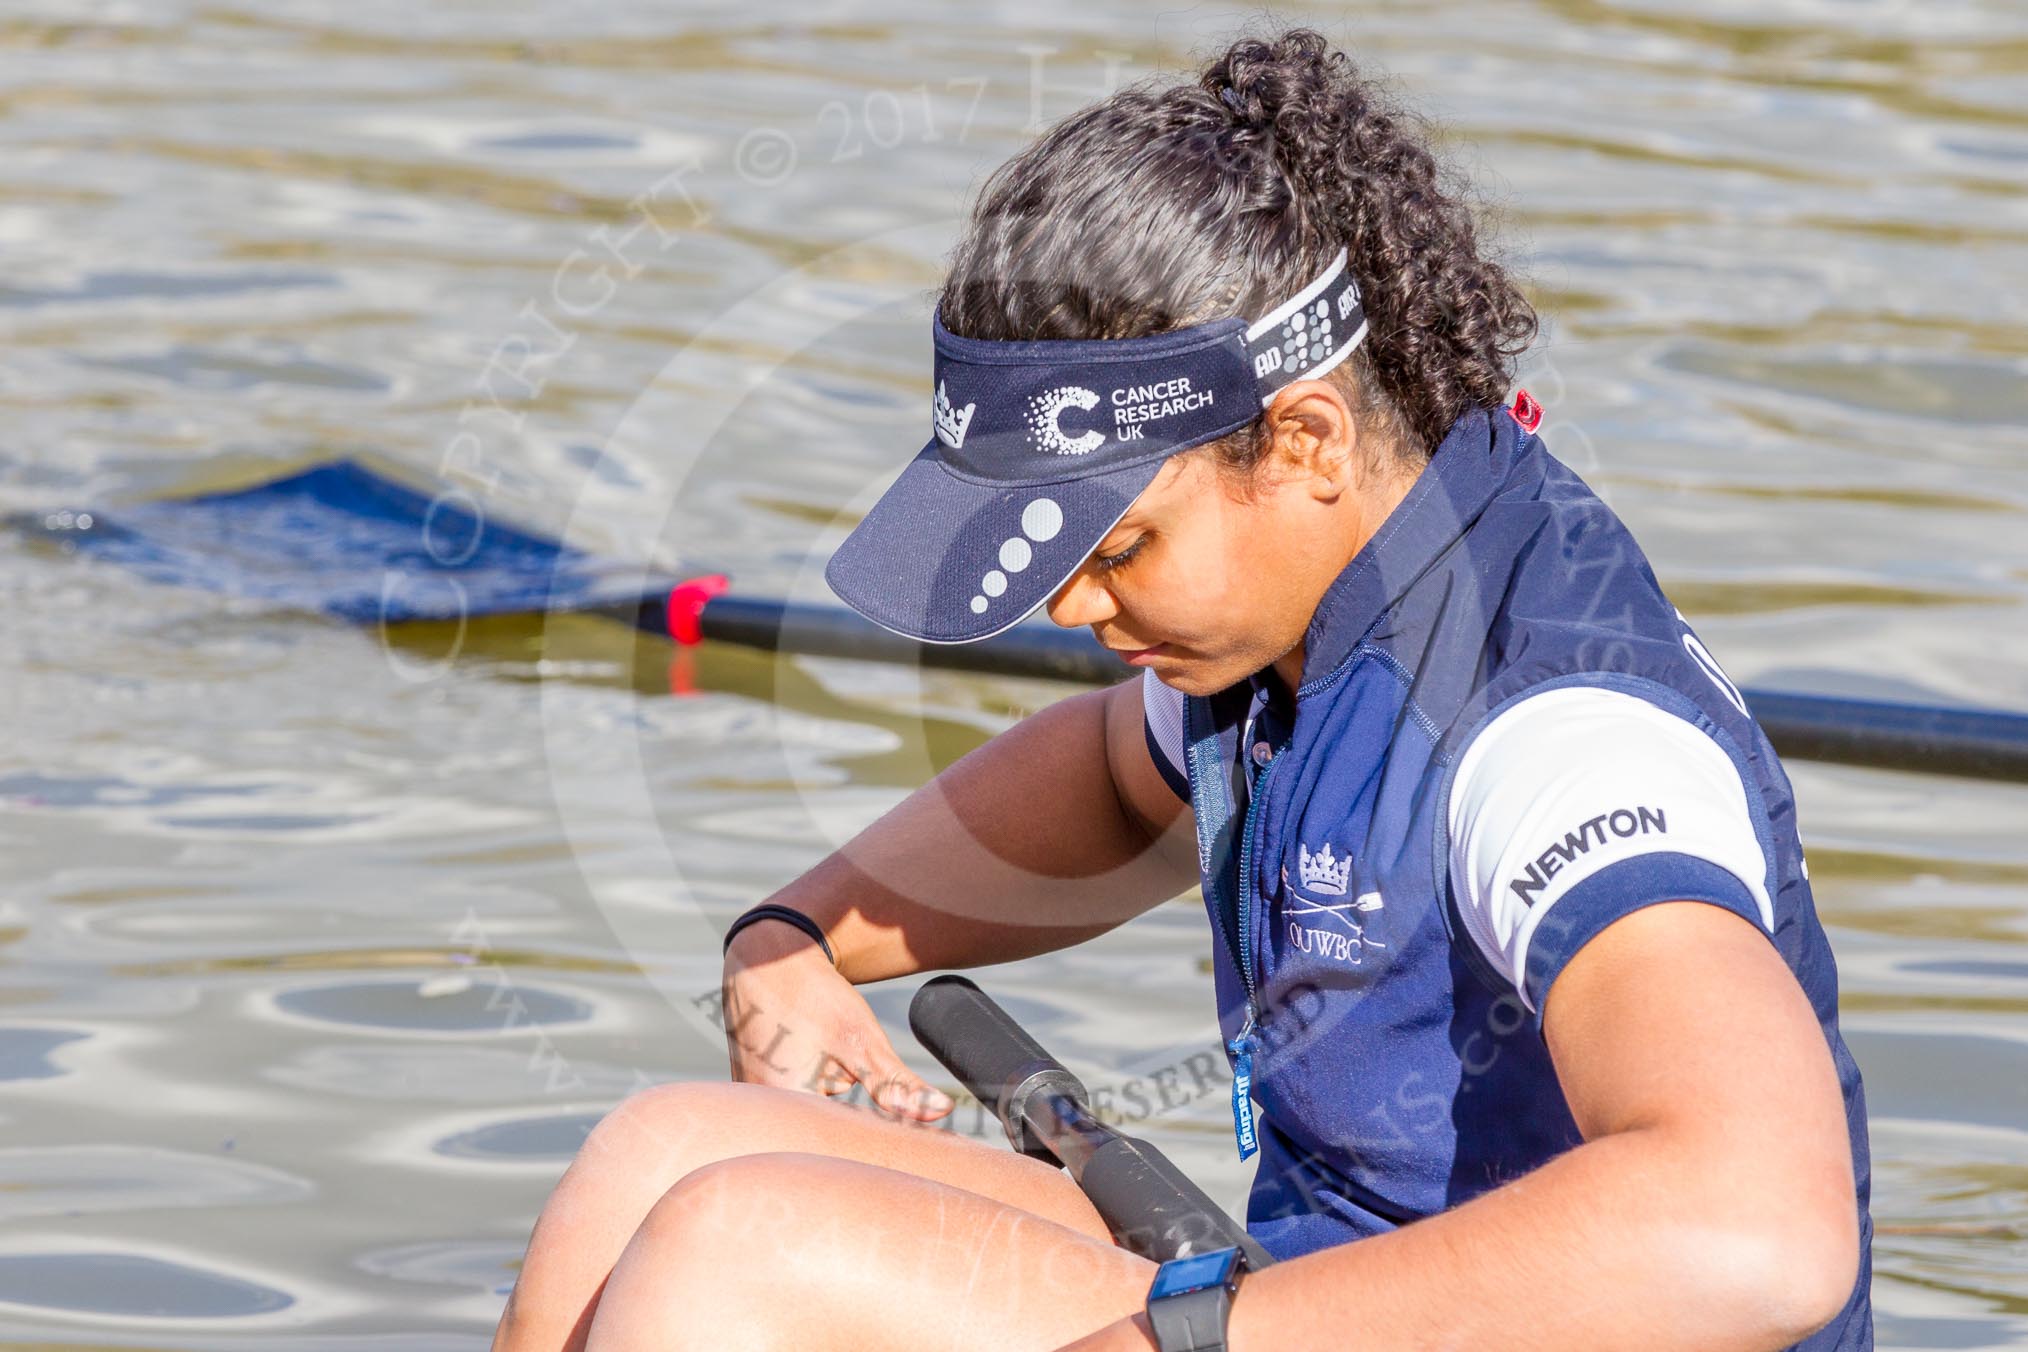 The Boat Race season 2017 -  The Cancer Research Women's Boat Race: OUWBC getting ready to set off, here 7 Jenna Hebert.
River Thames between Putney Bridge and Mortlake,
London SW15,

United Kingdom,
on 02 April 2017 at 15:52, image #88